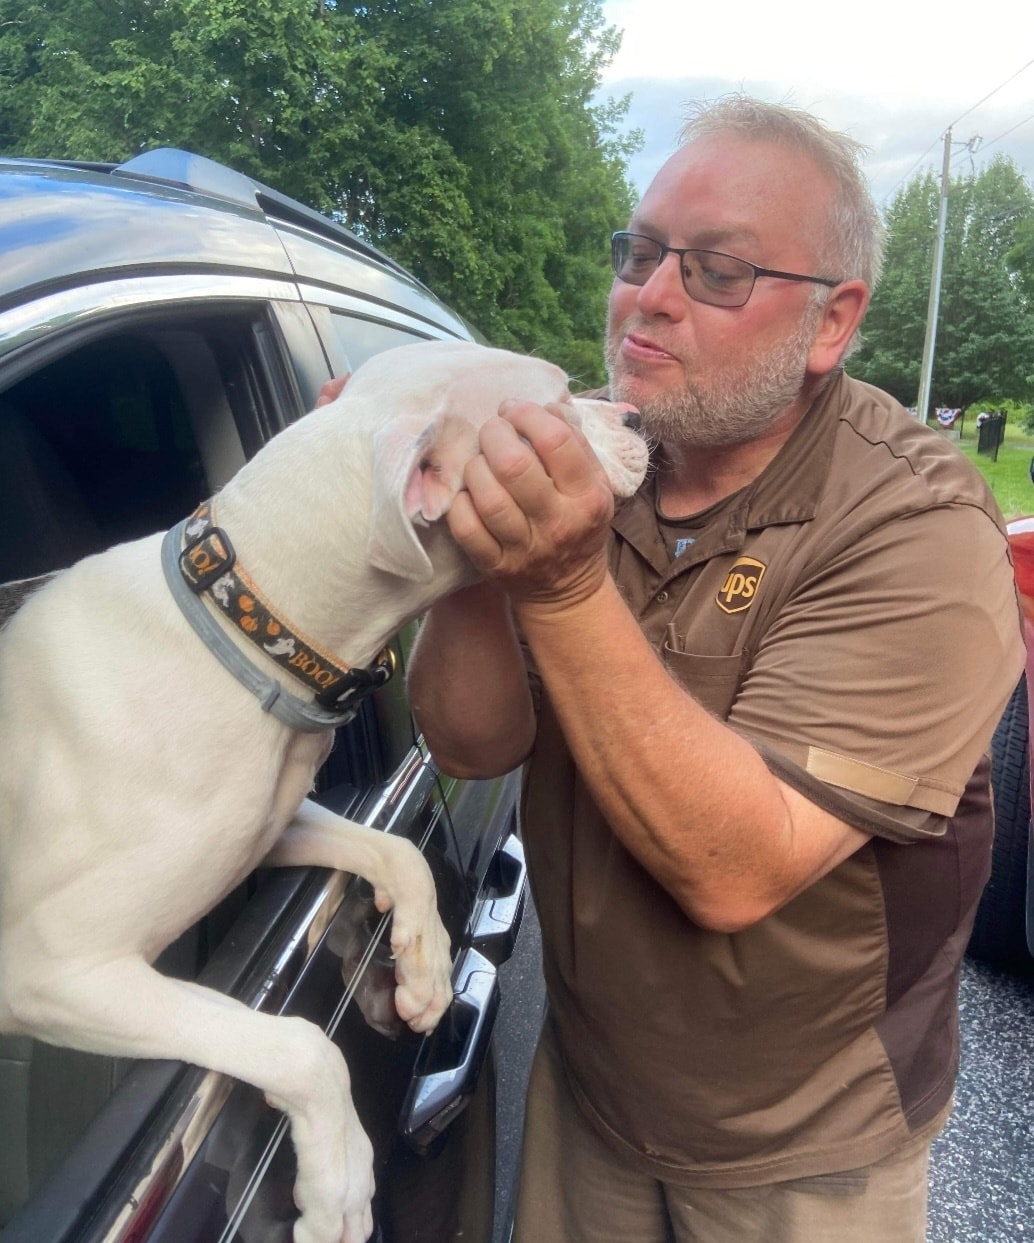 UPS man gives kisses to dog who is sticking his head out car window